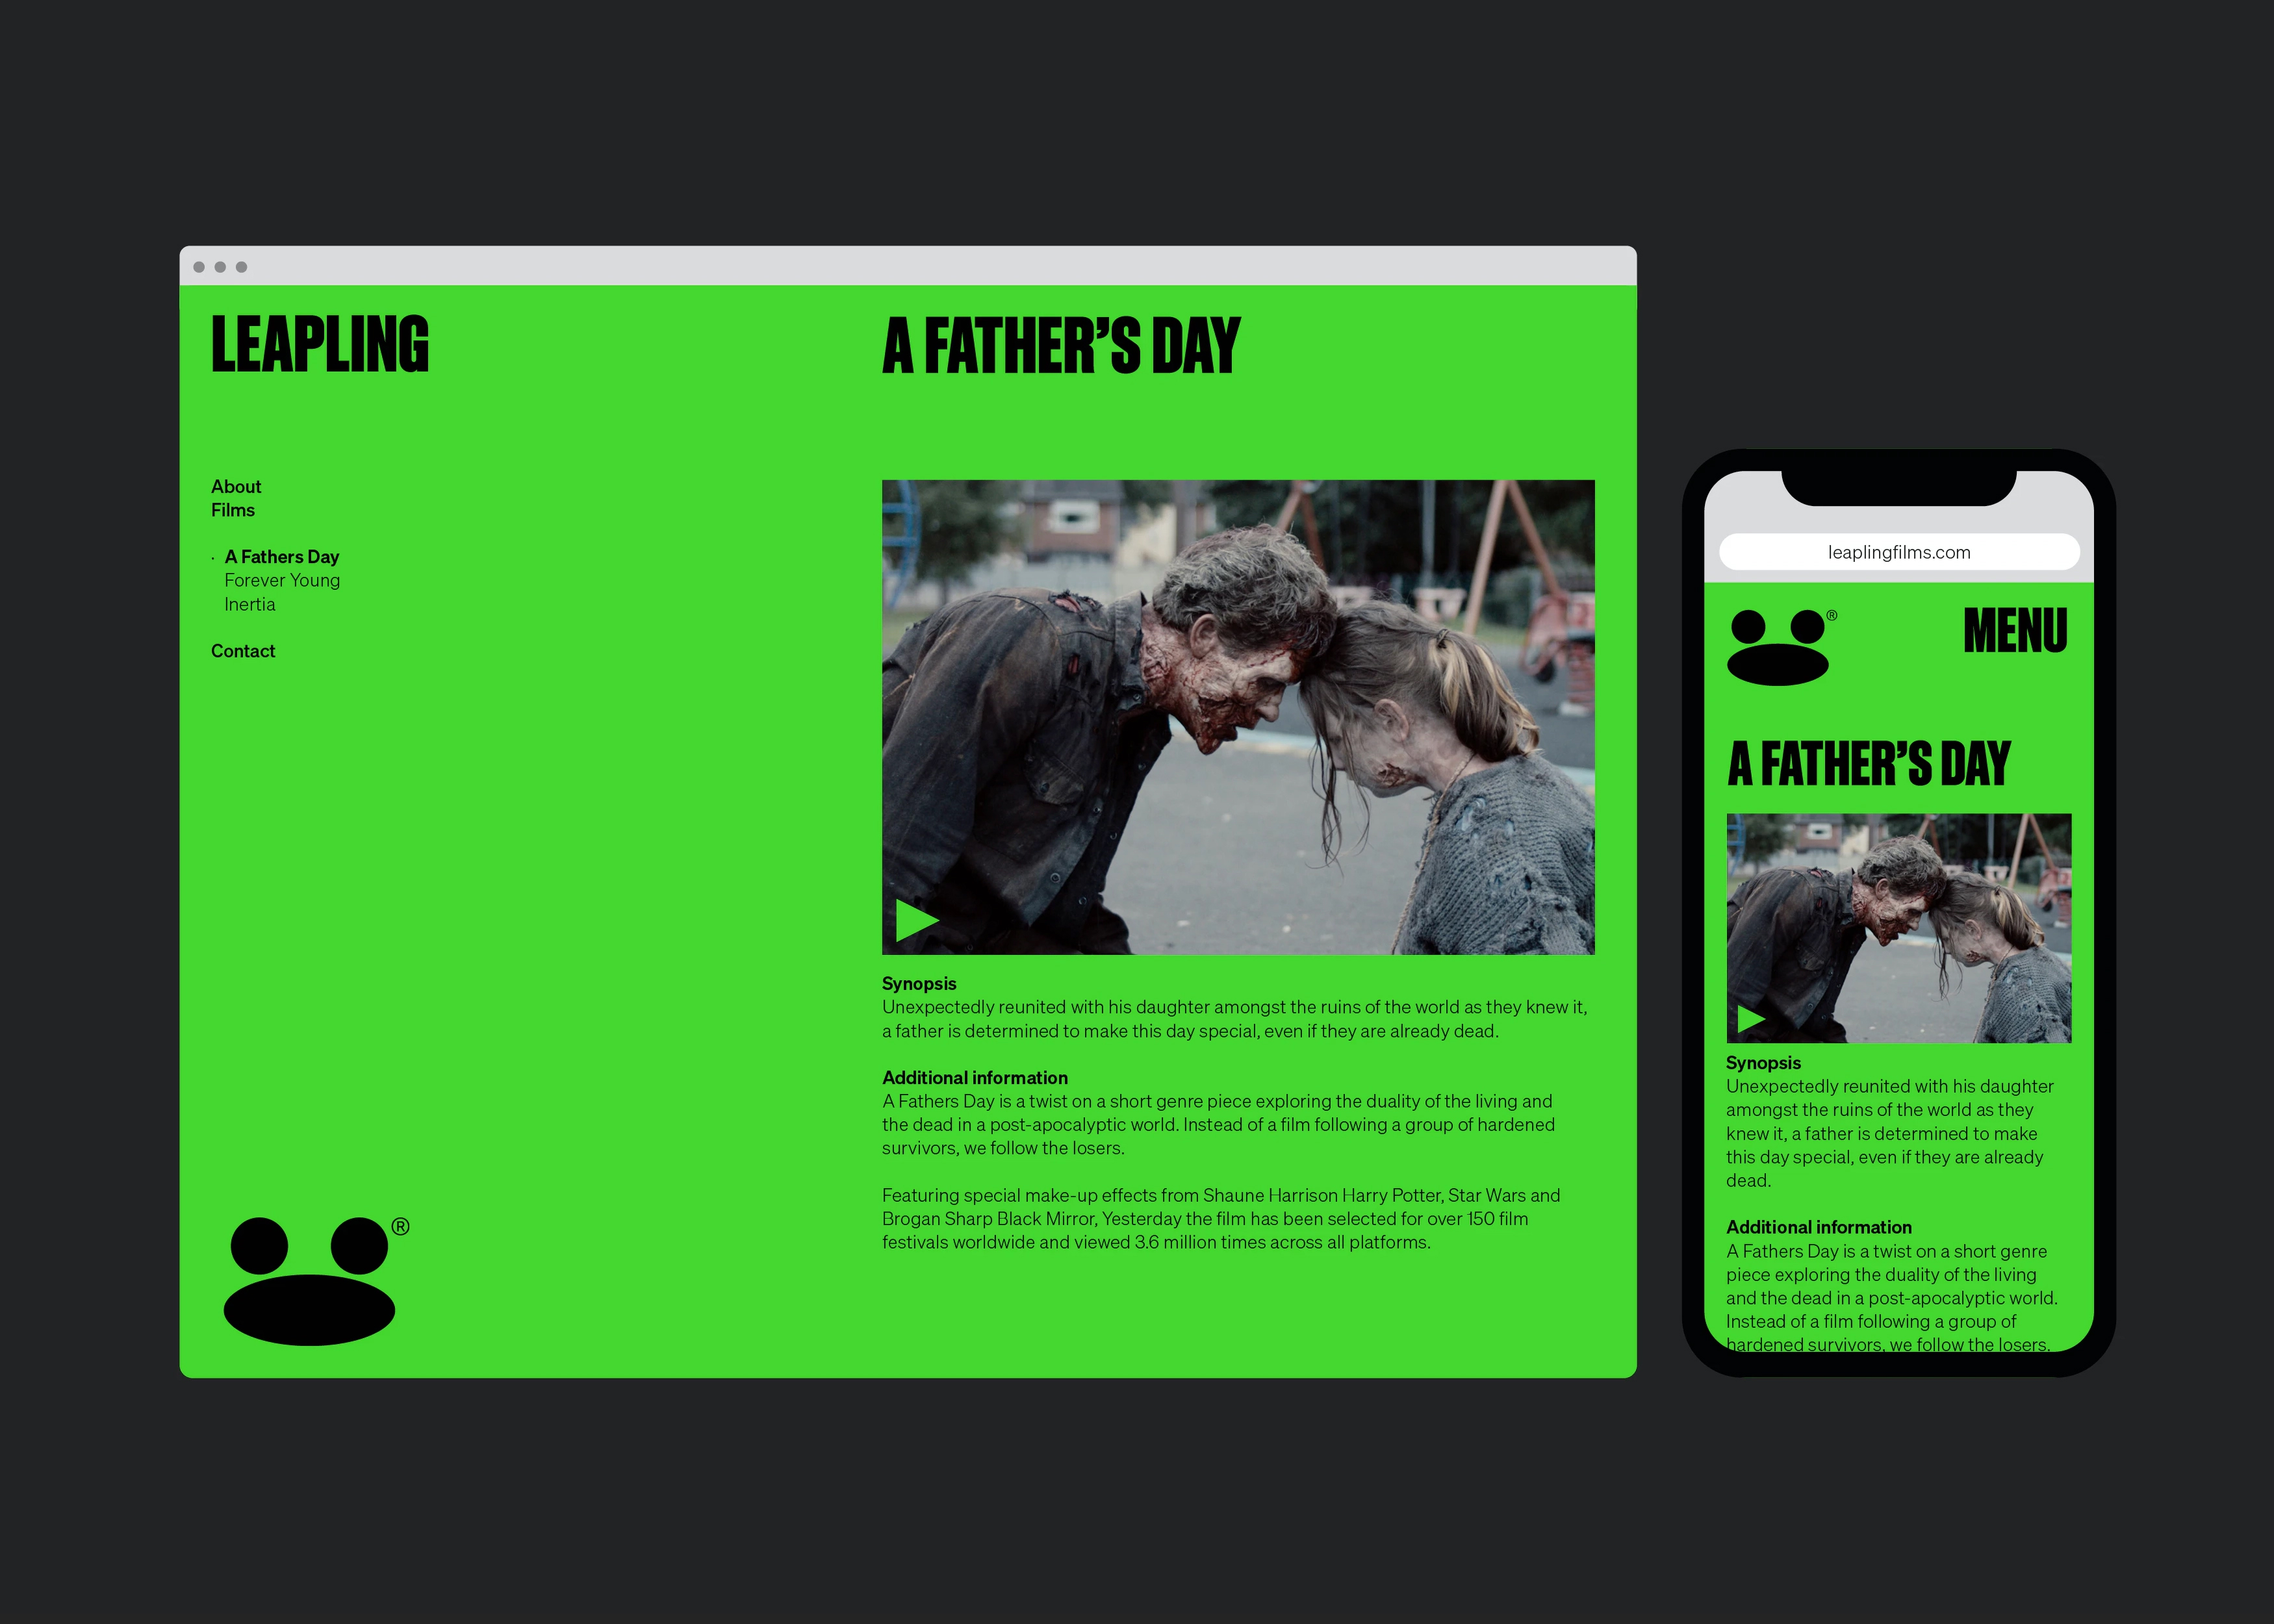 Logo and website design by F37 for Manchester-based independent production company Leapling Films. Reviewed on BP&O